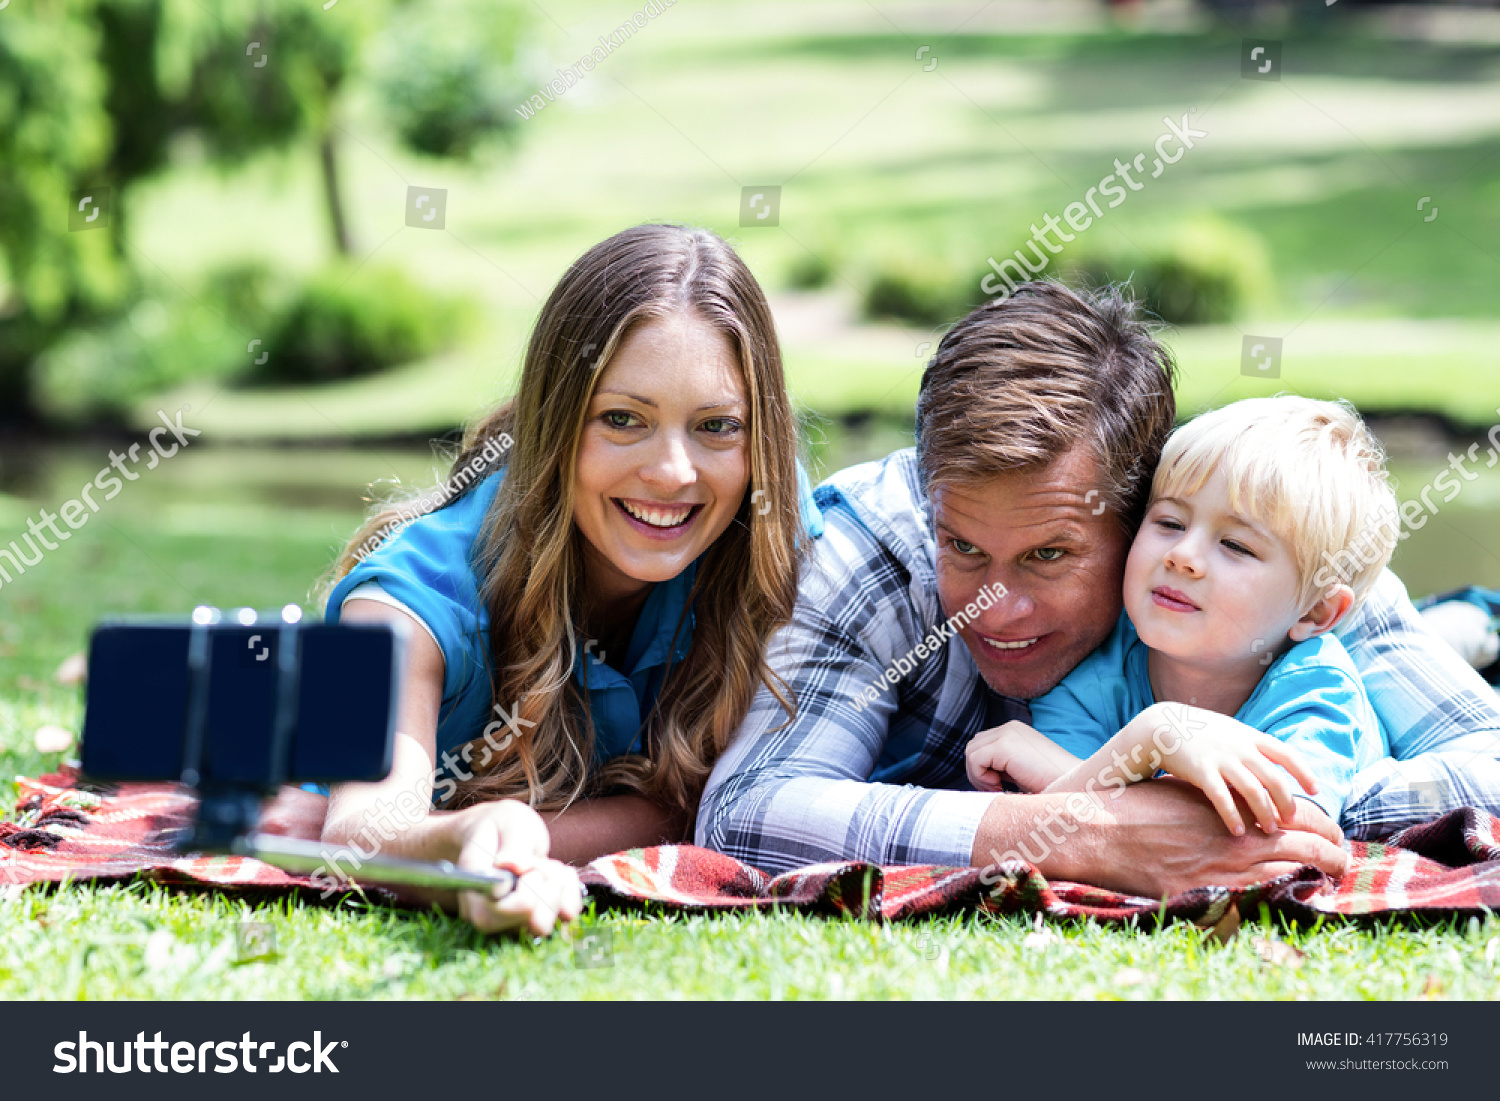 Parents and son taking a selfie on mobile phone with selfie stick in the park #417756319